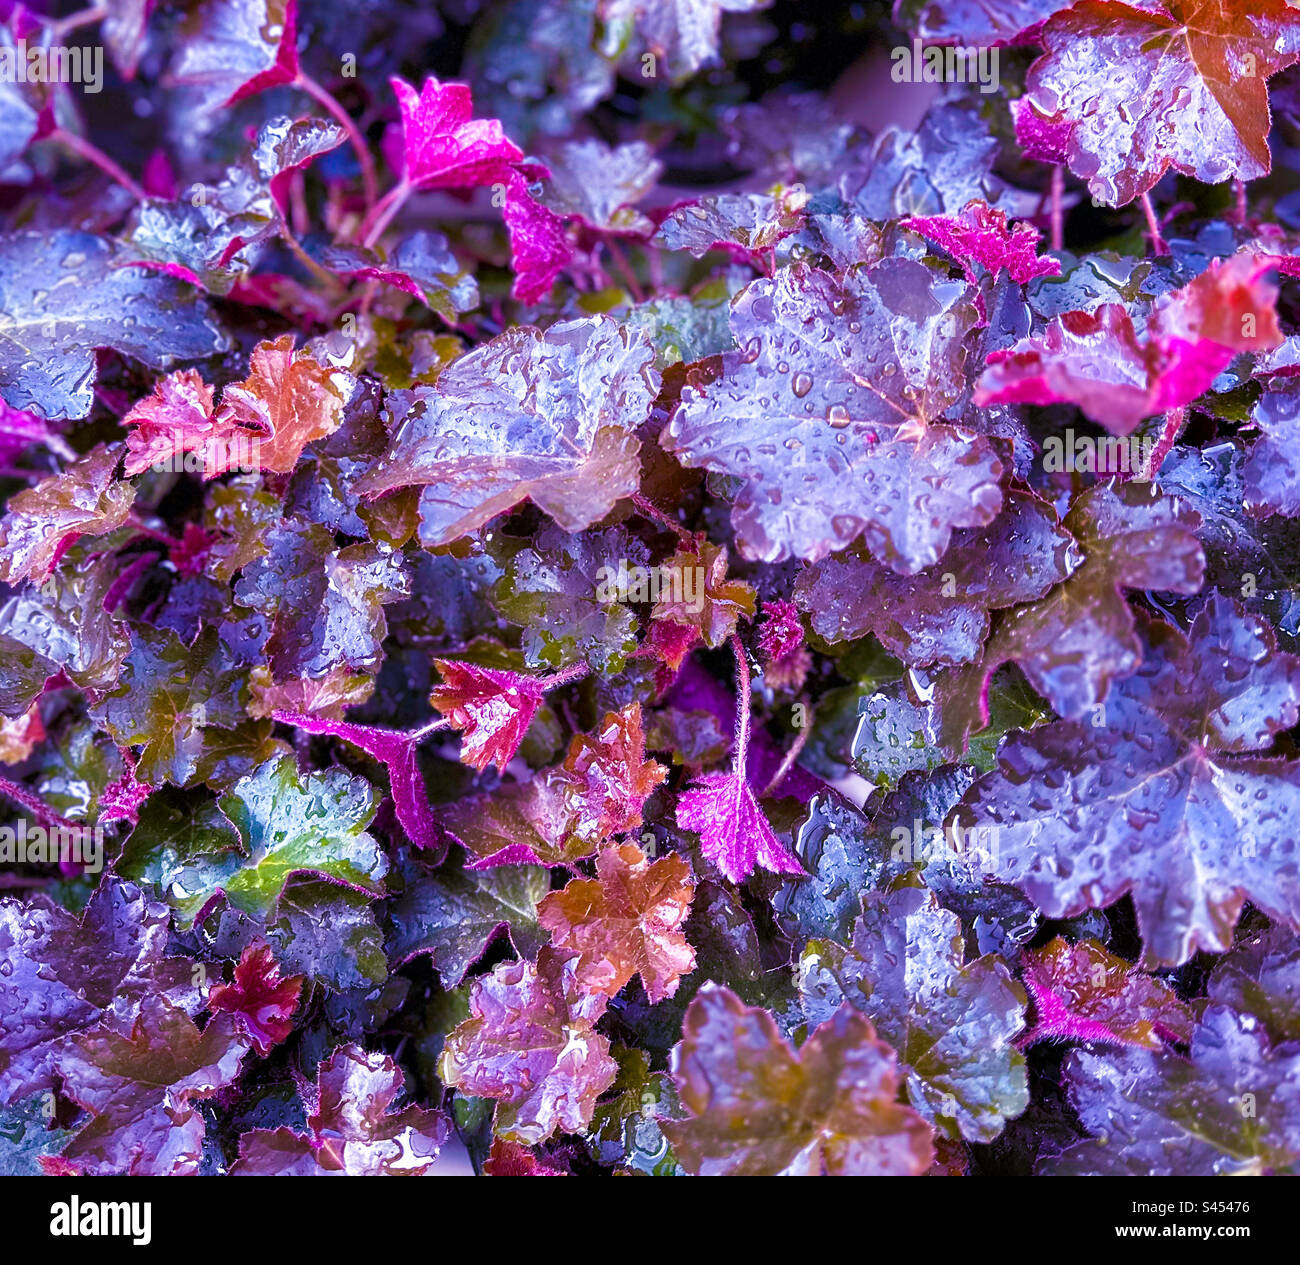 Colorful purple and pink texture shot of coral bell plant foliage. Stock Photo